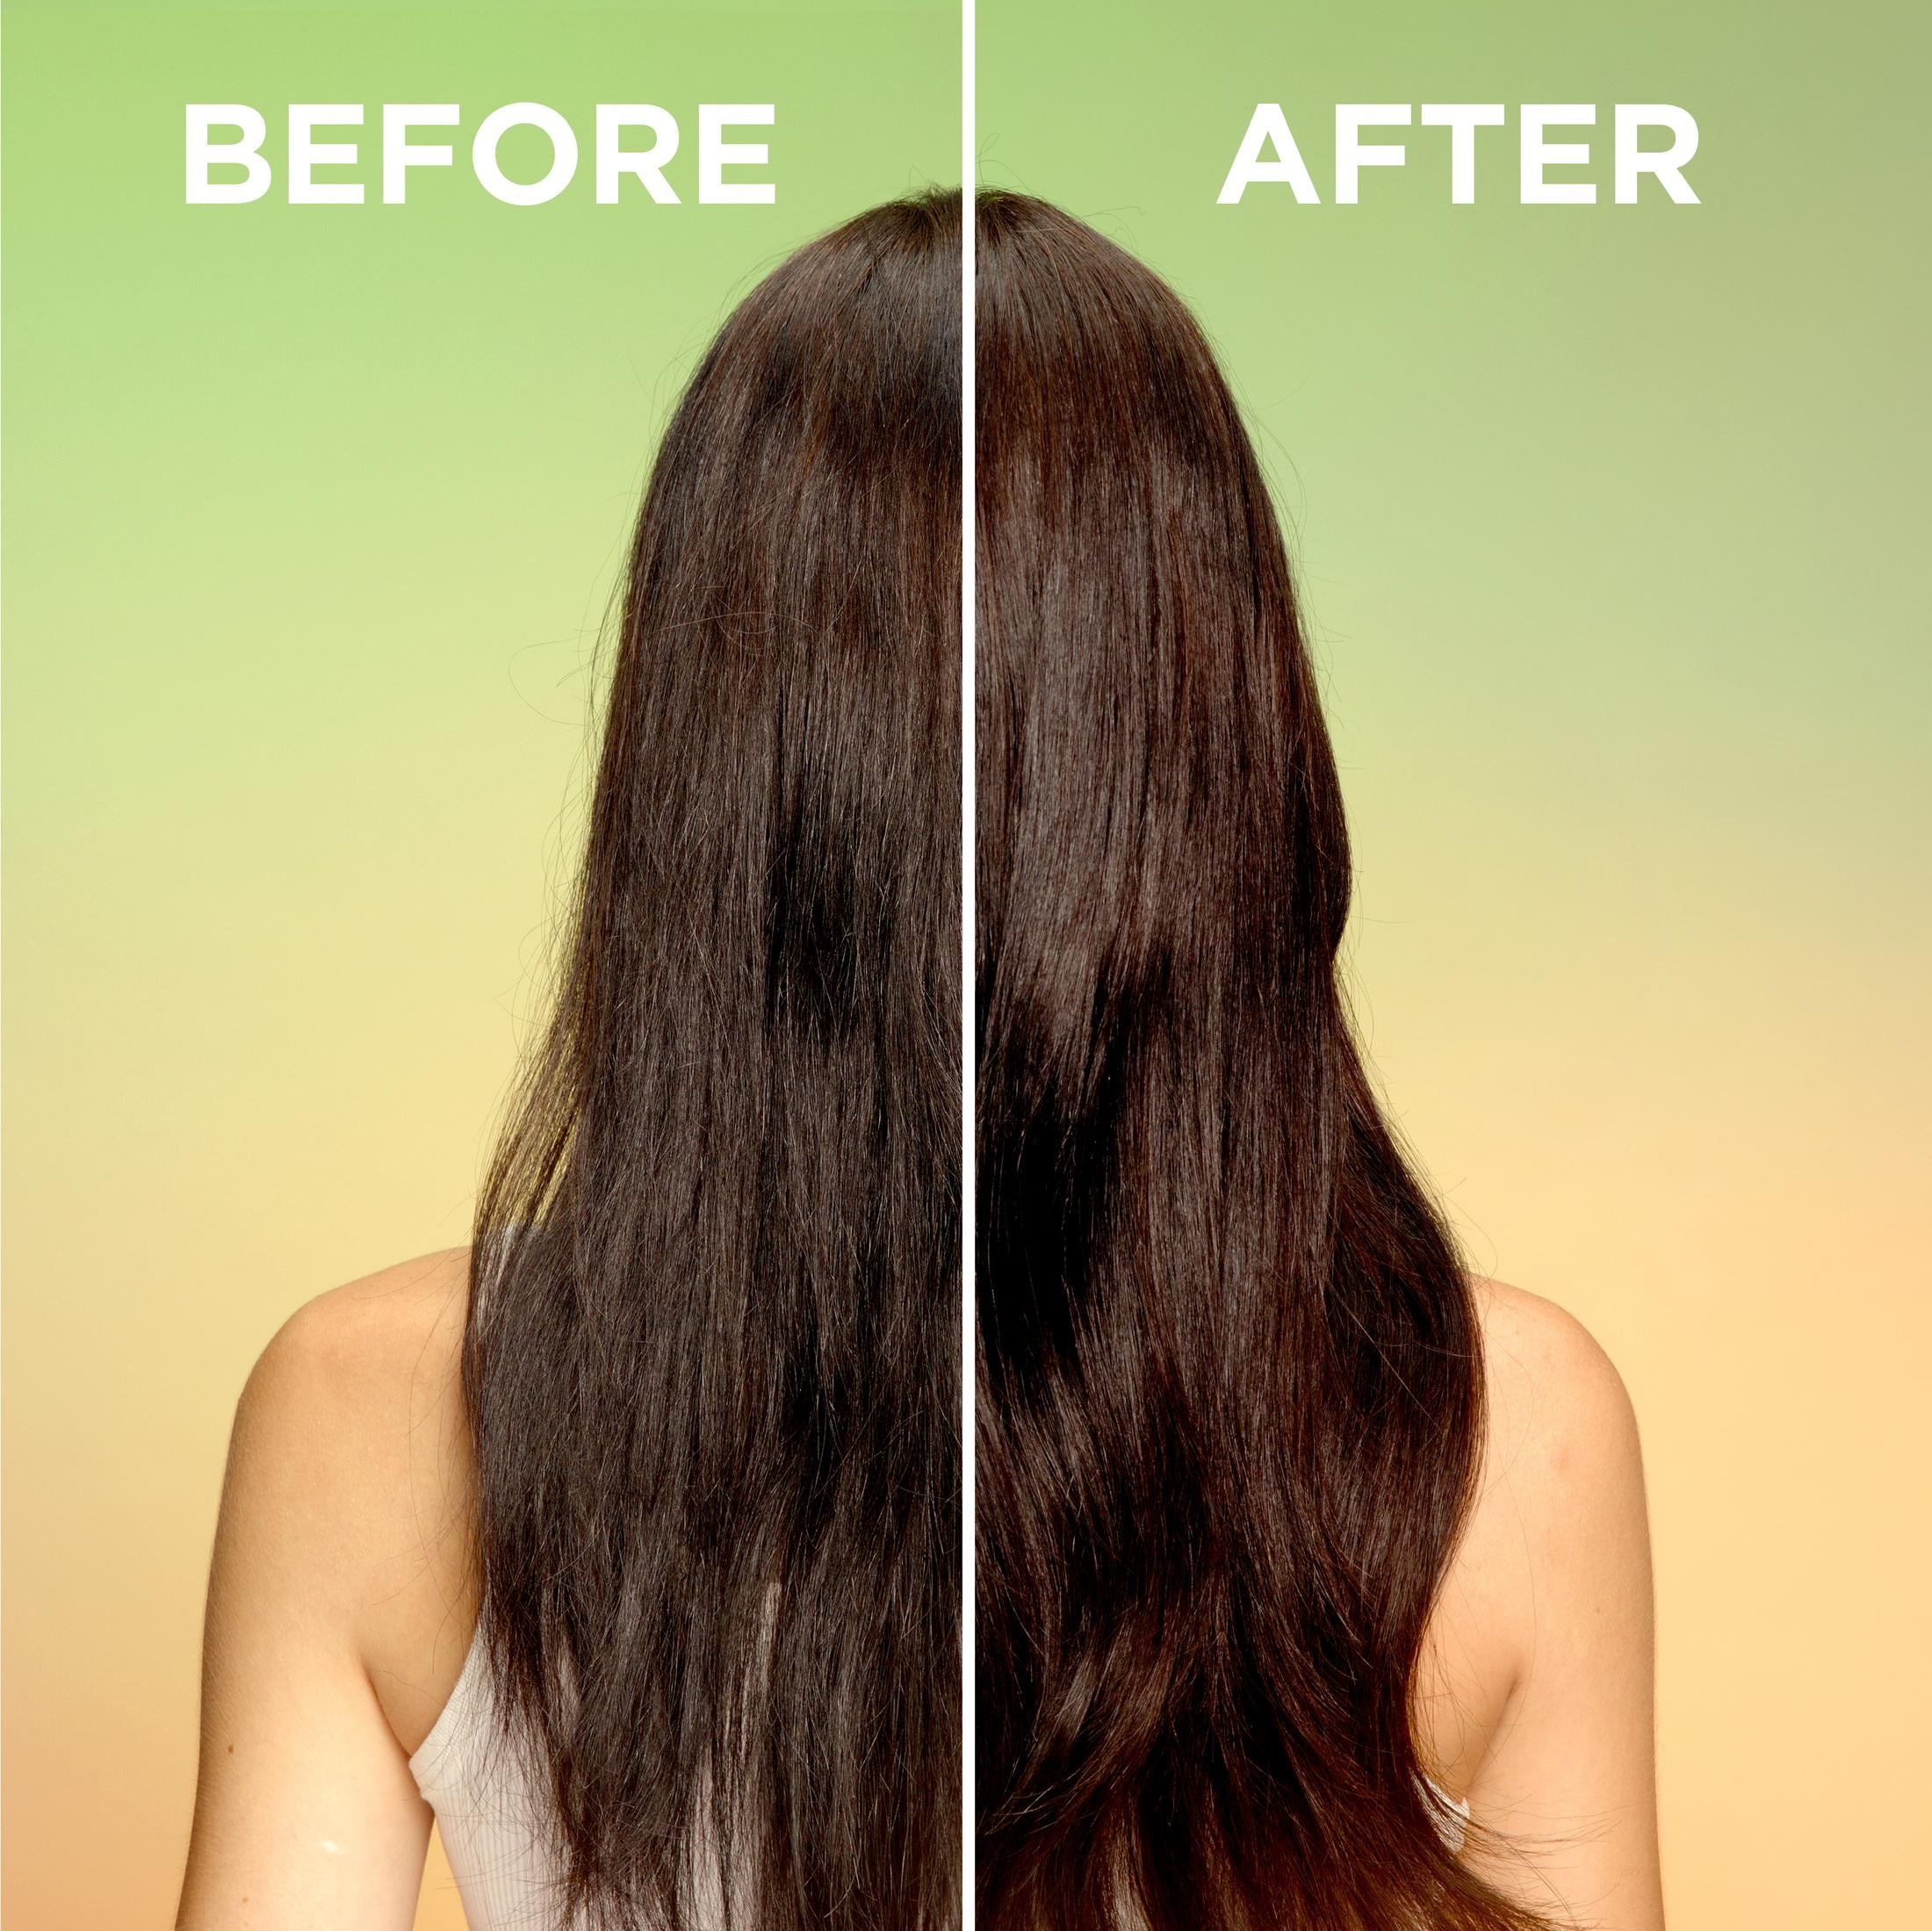 Volume and bounce: Fructis Grow Strong Thickening Shampoo - Garnier